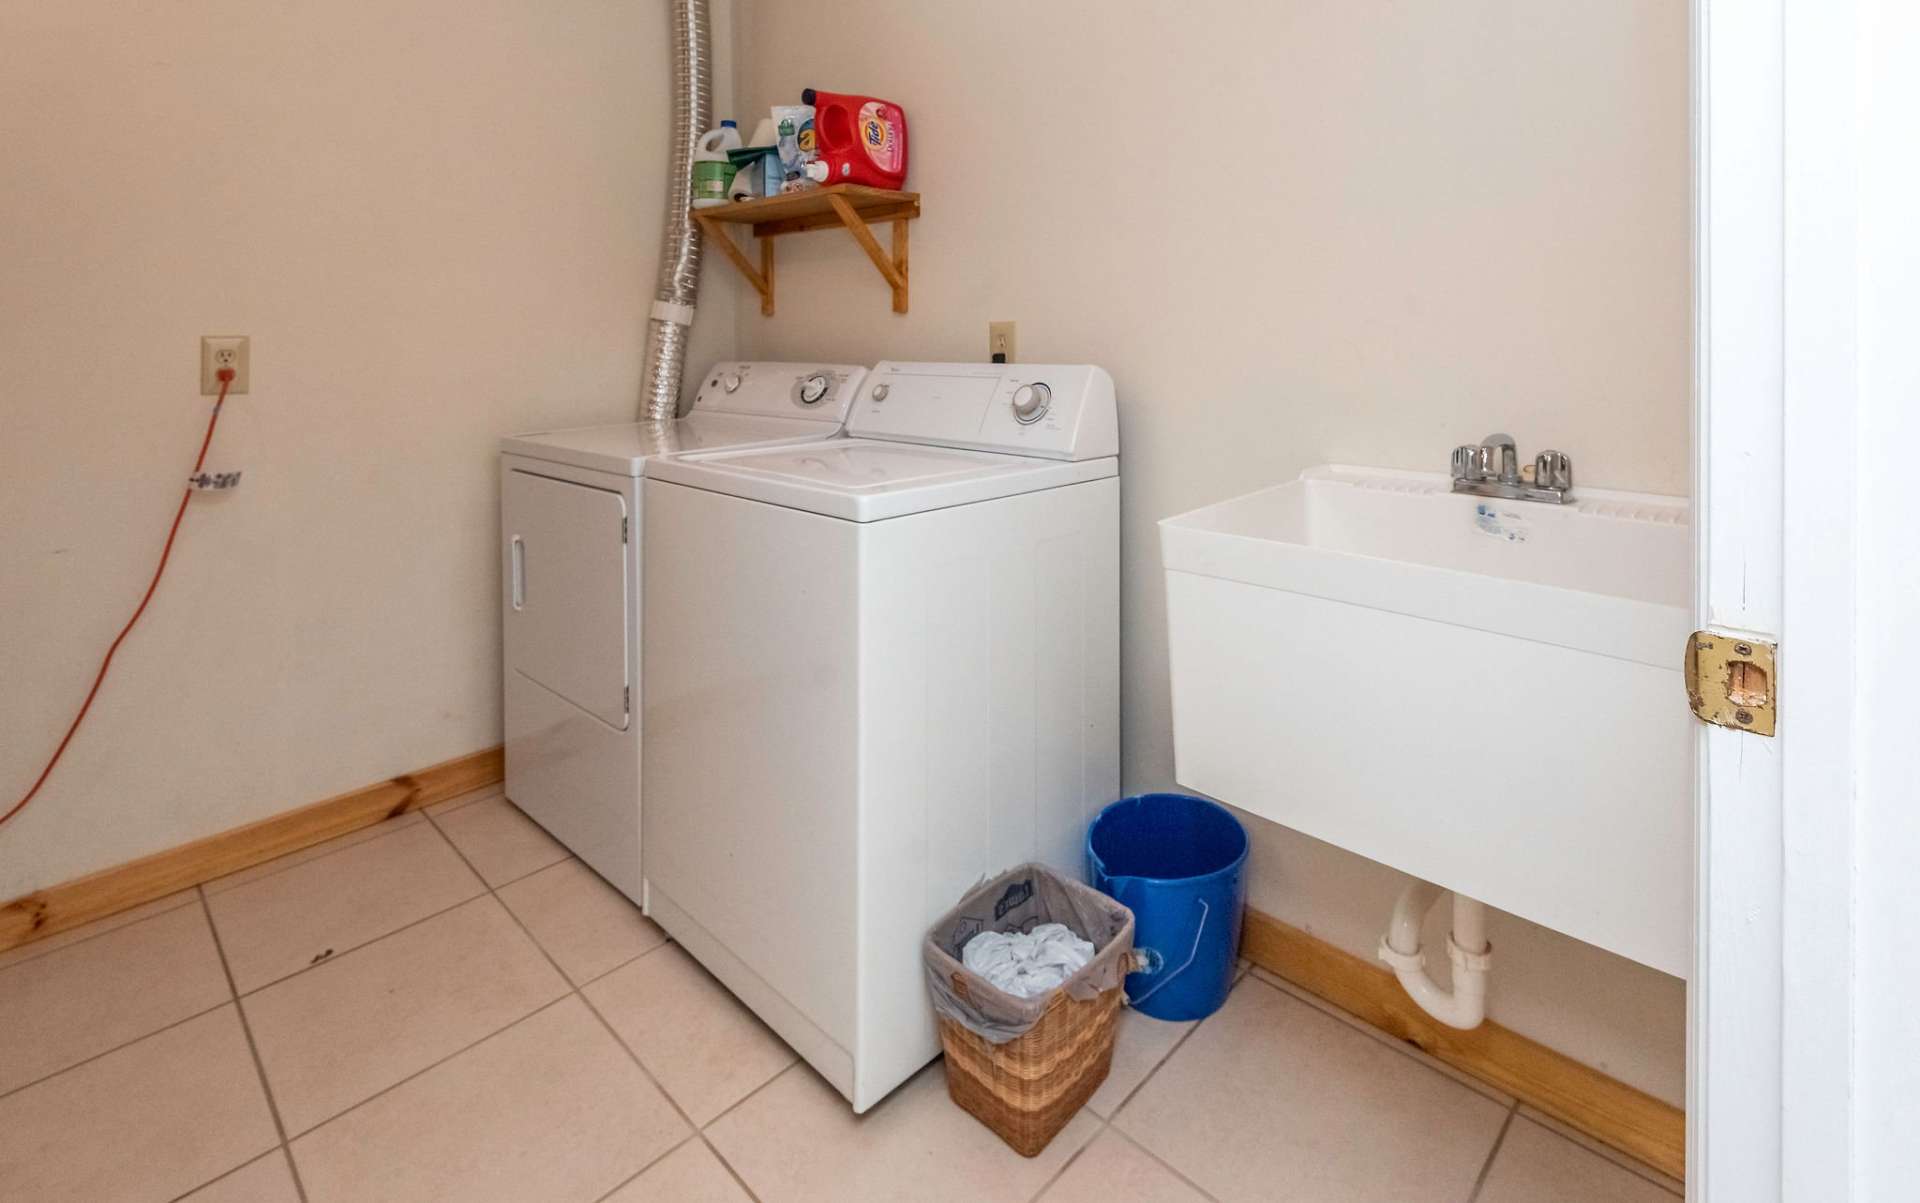 Laundry room is located on the lower level.